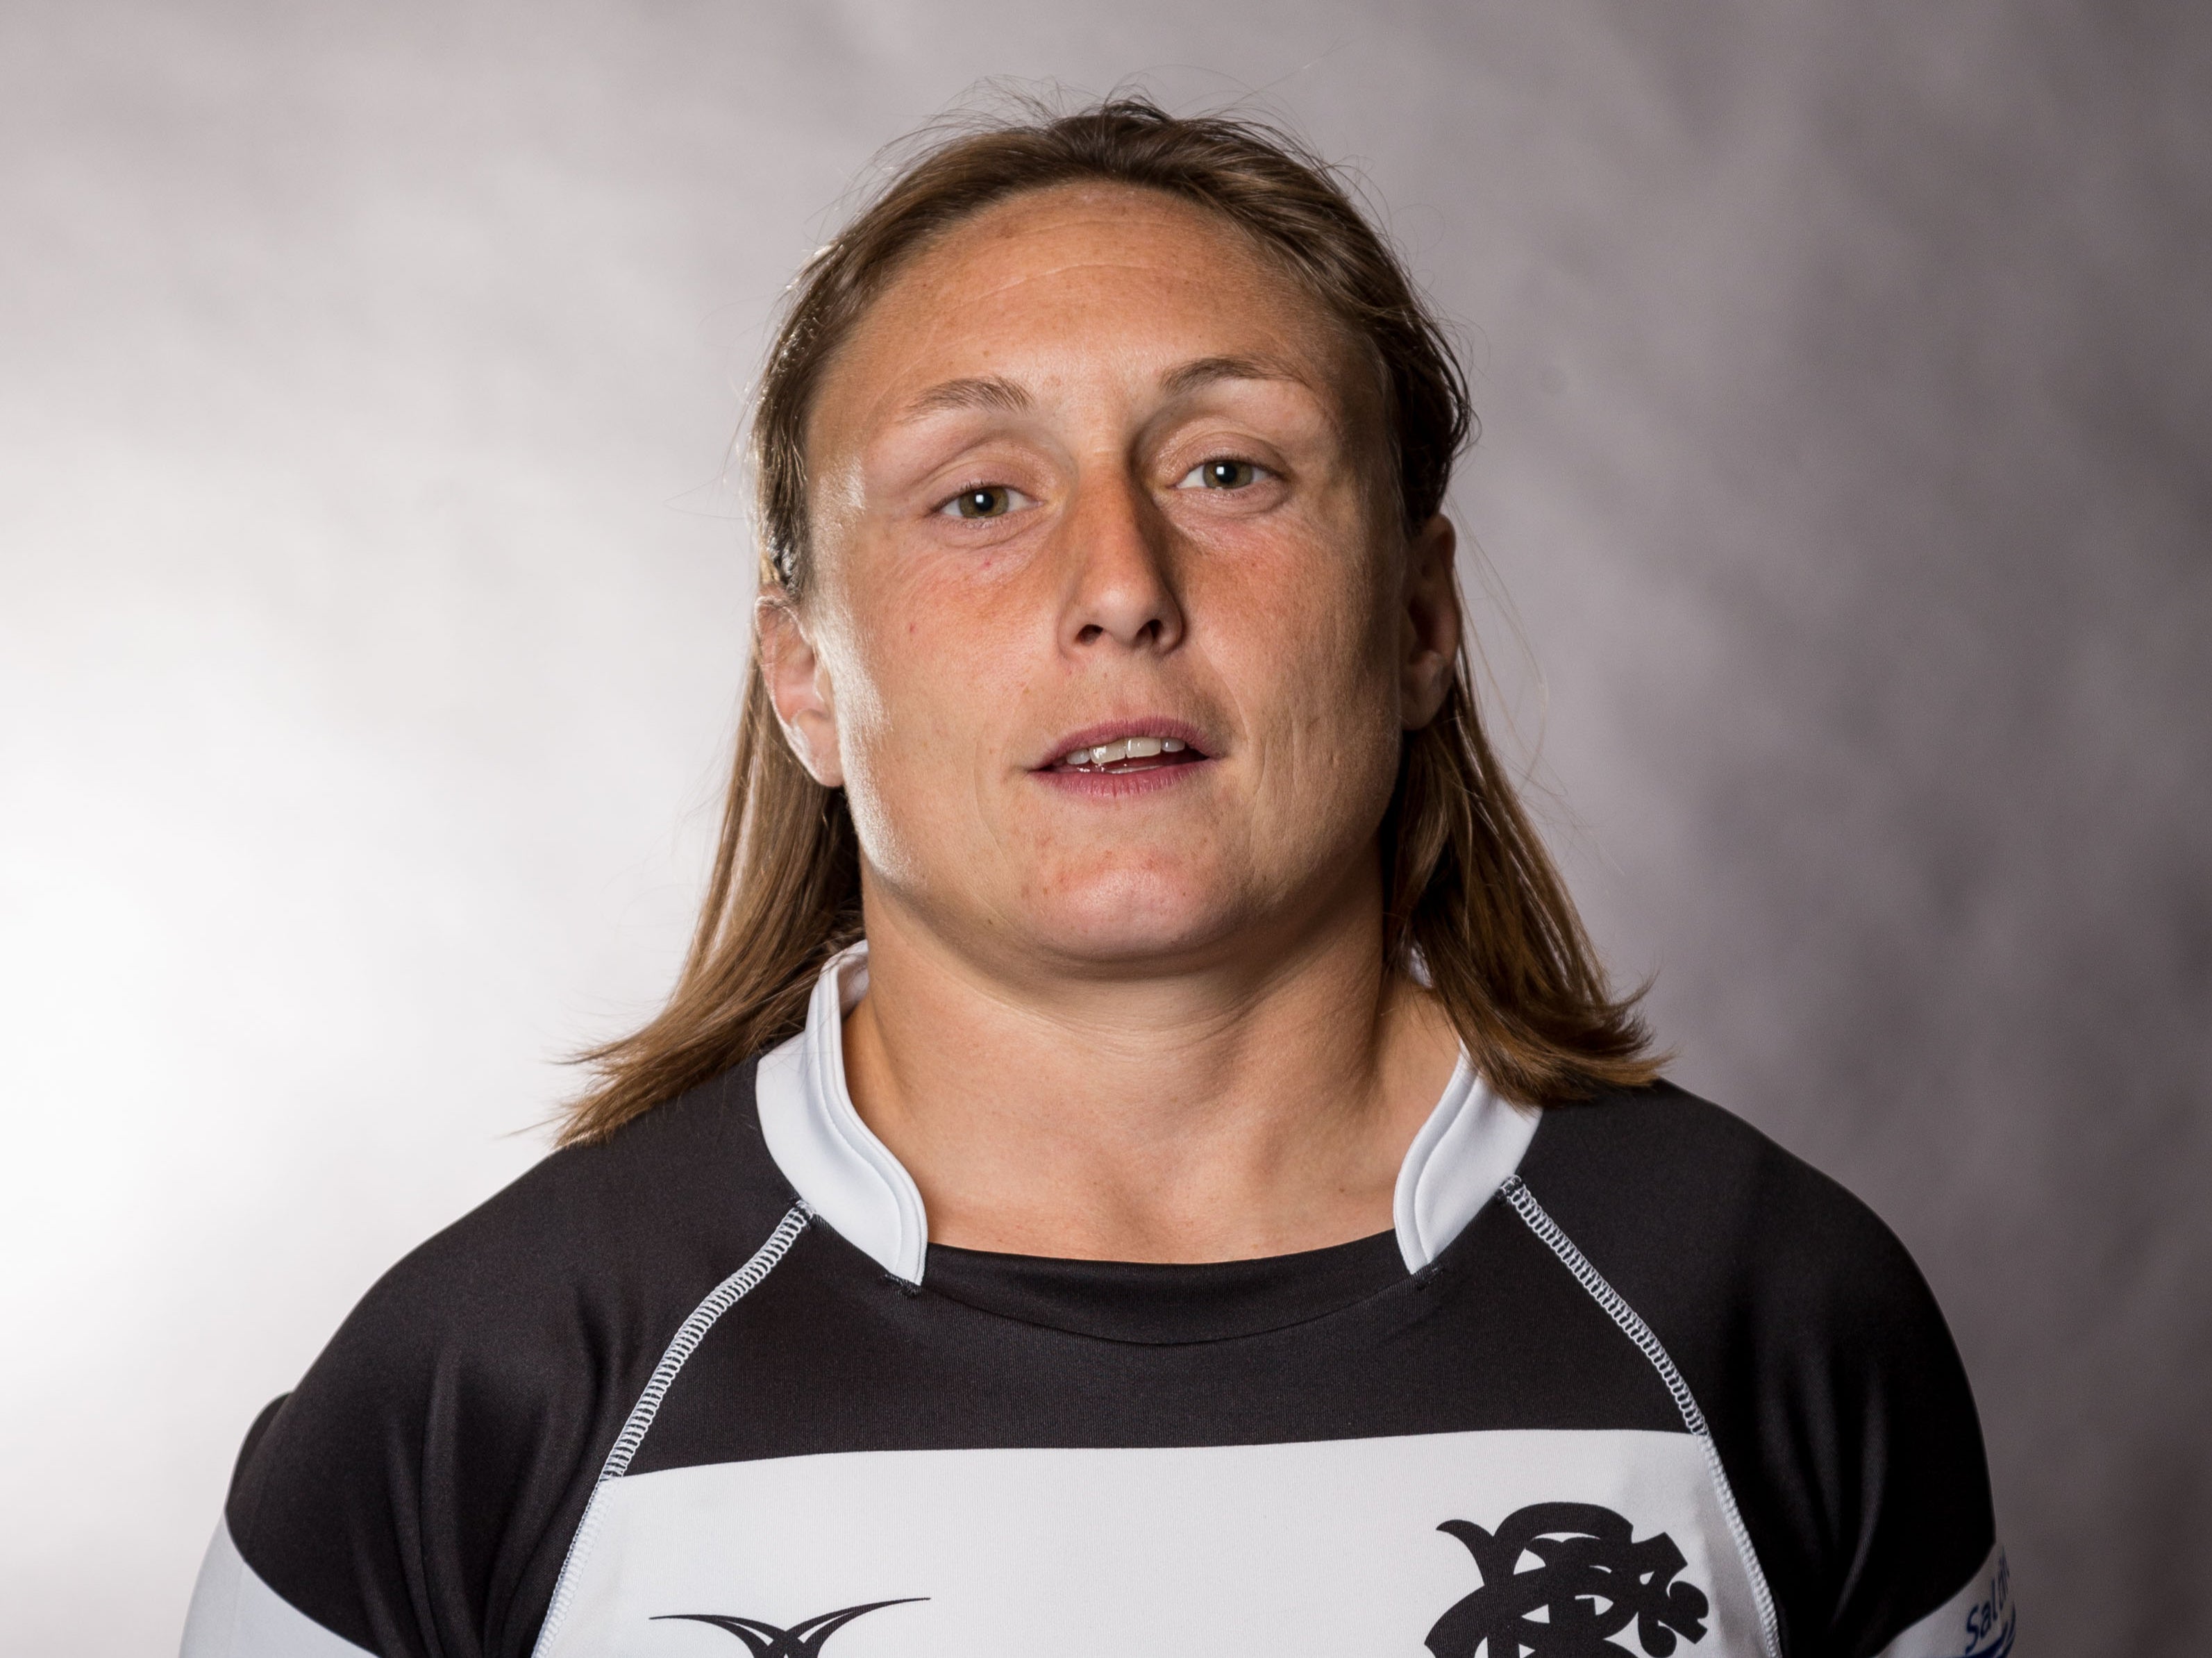 Gaelle Mignot will be a trailblazer in this year’s Women’s Six Nations